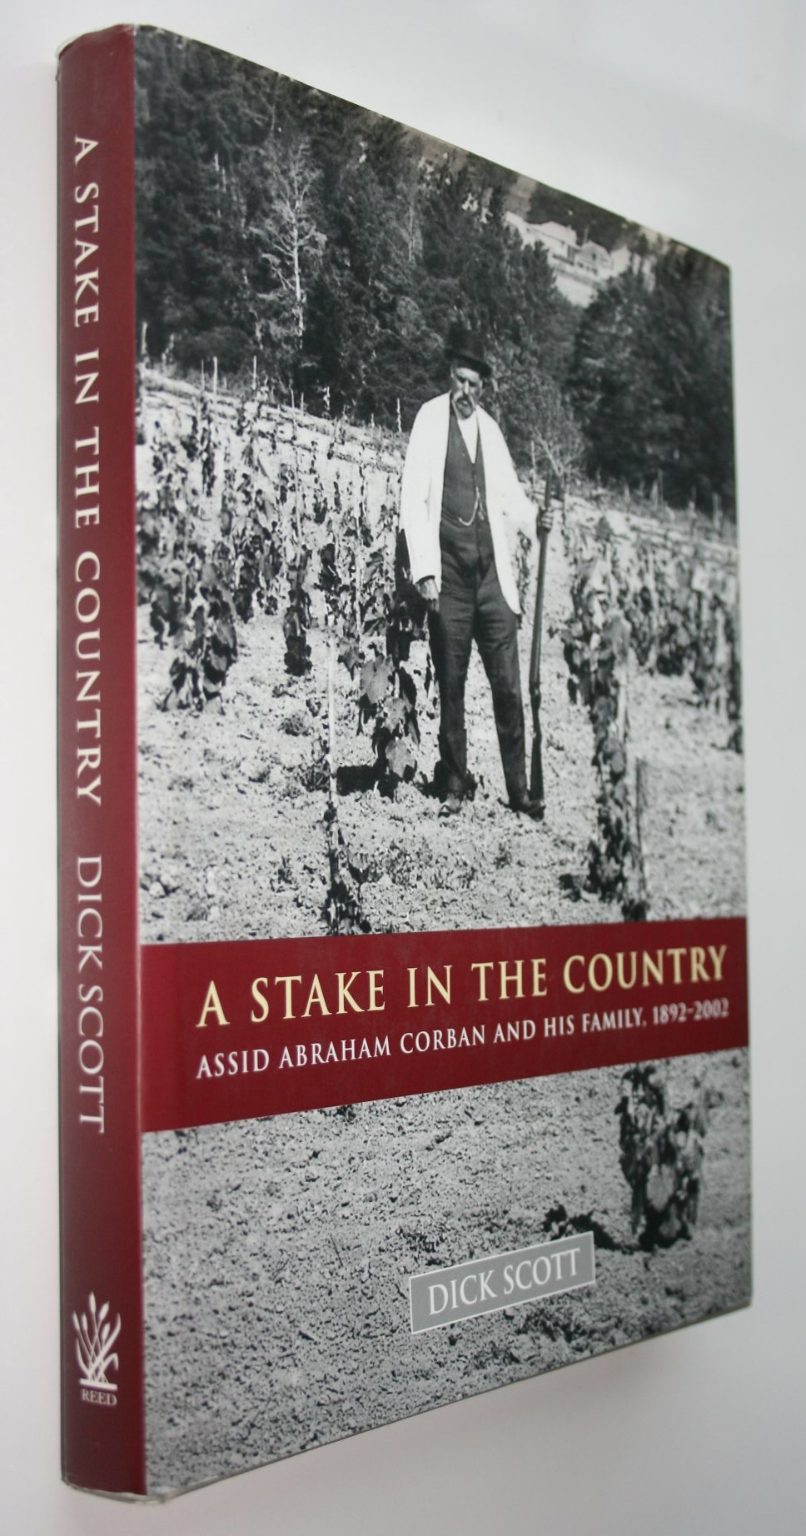 A Stake in the Country: Assid Abraham Corban and His Family 1892-2002 BY Dick Scott. SCARCE SIGNED COPY.